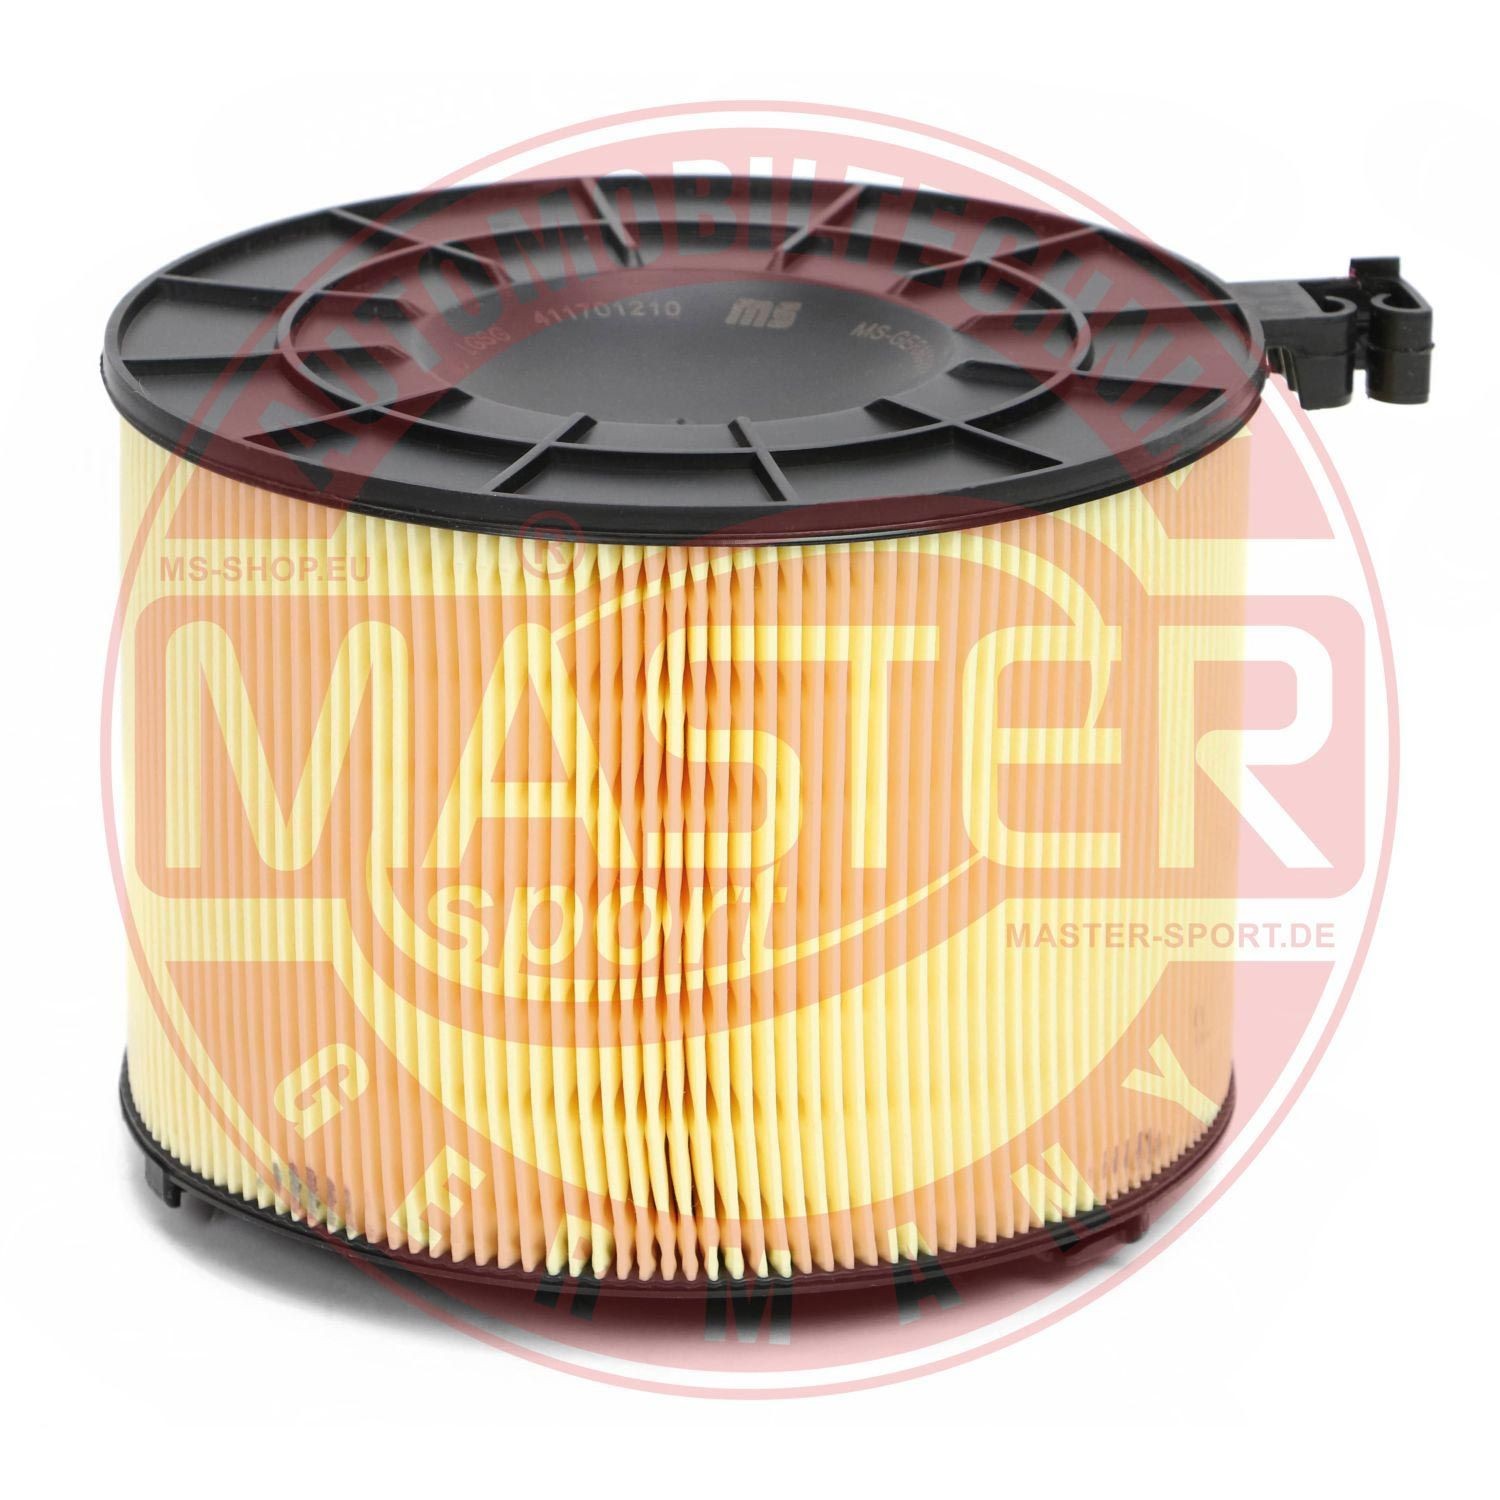 Great value for money - MASTER-SPORT Air filter 17012/1-LF-PCS-MS